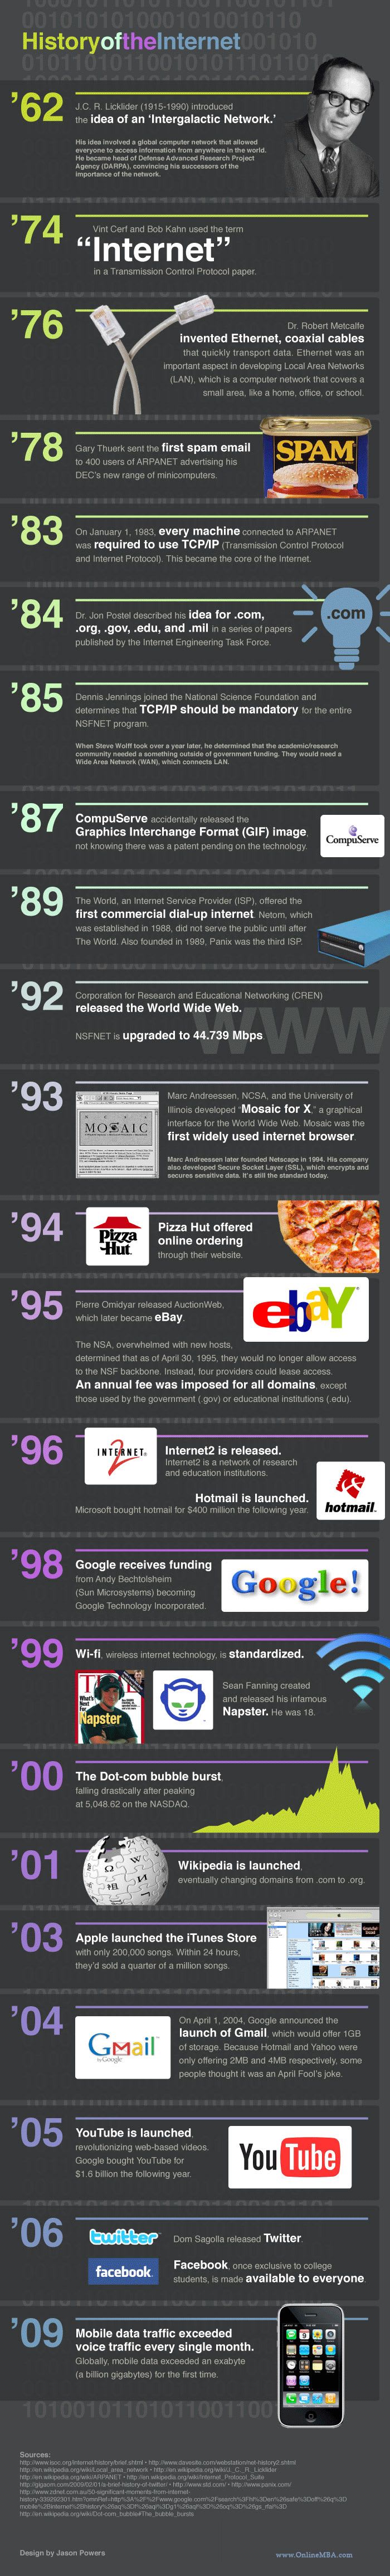 The History Of The Internet